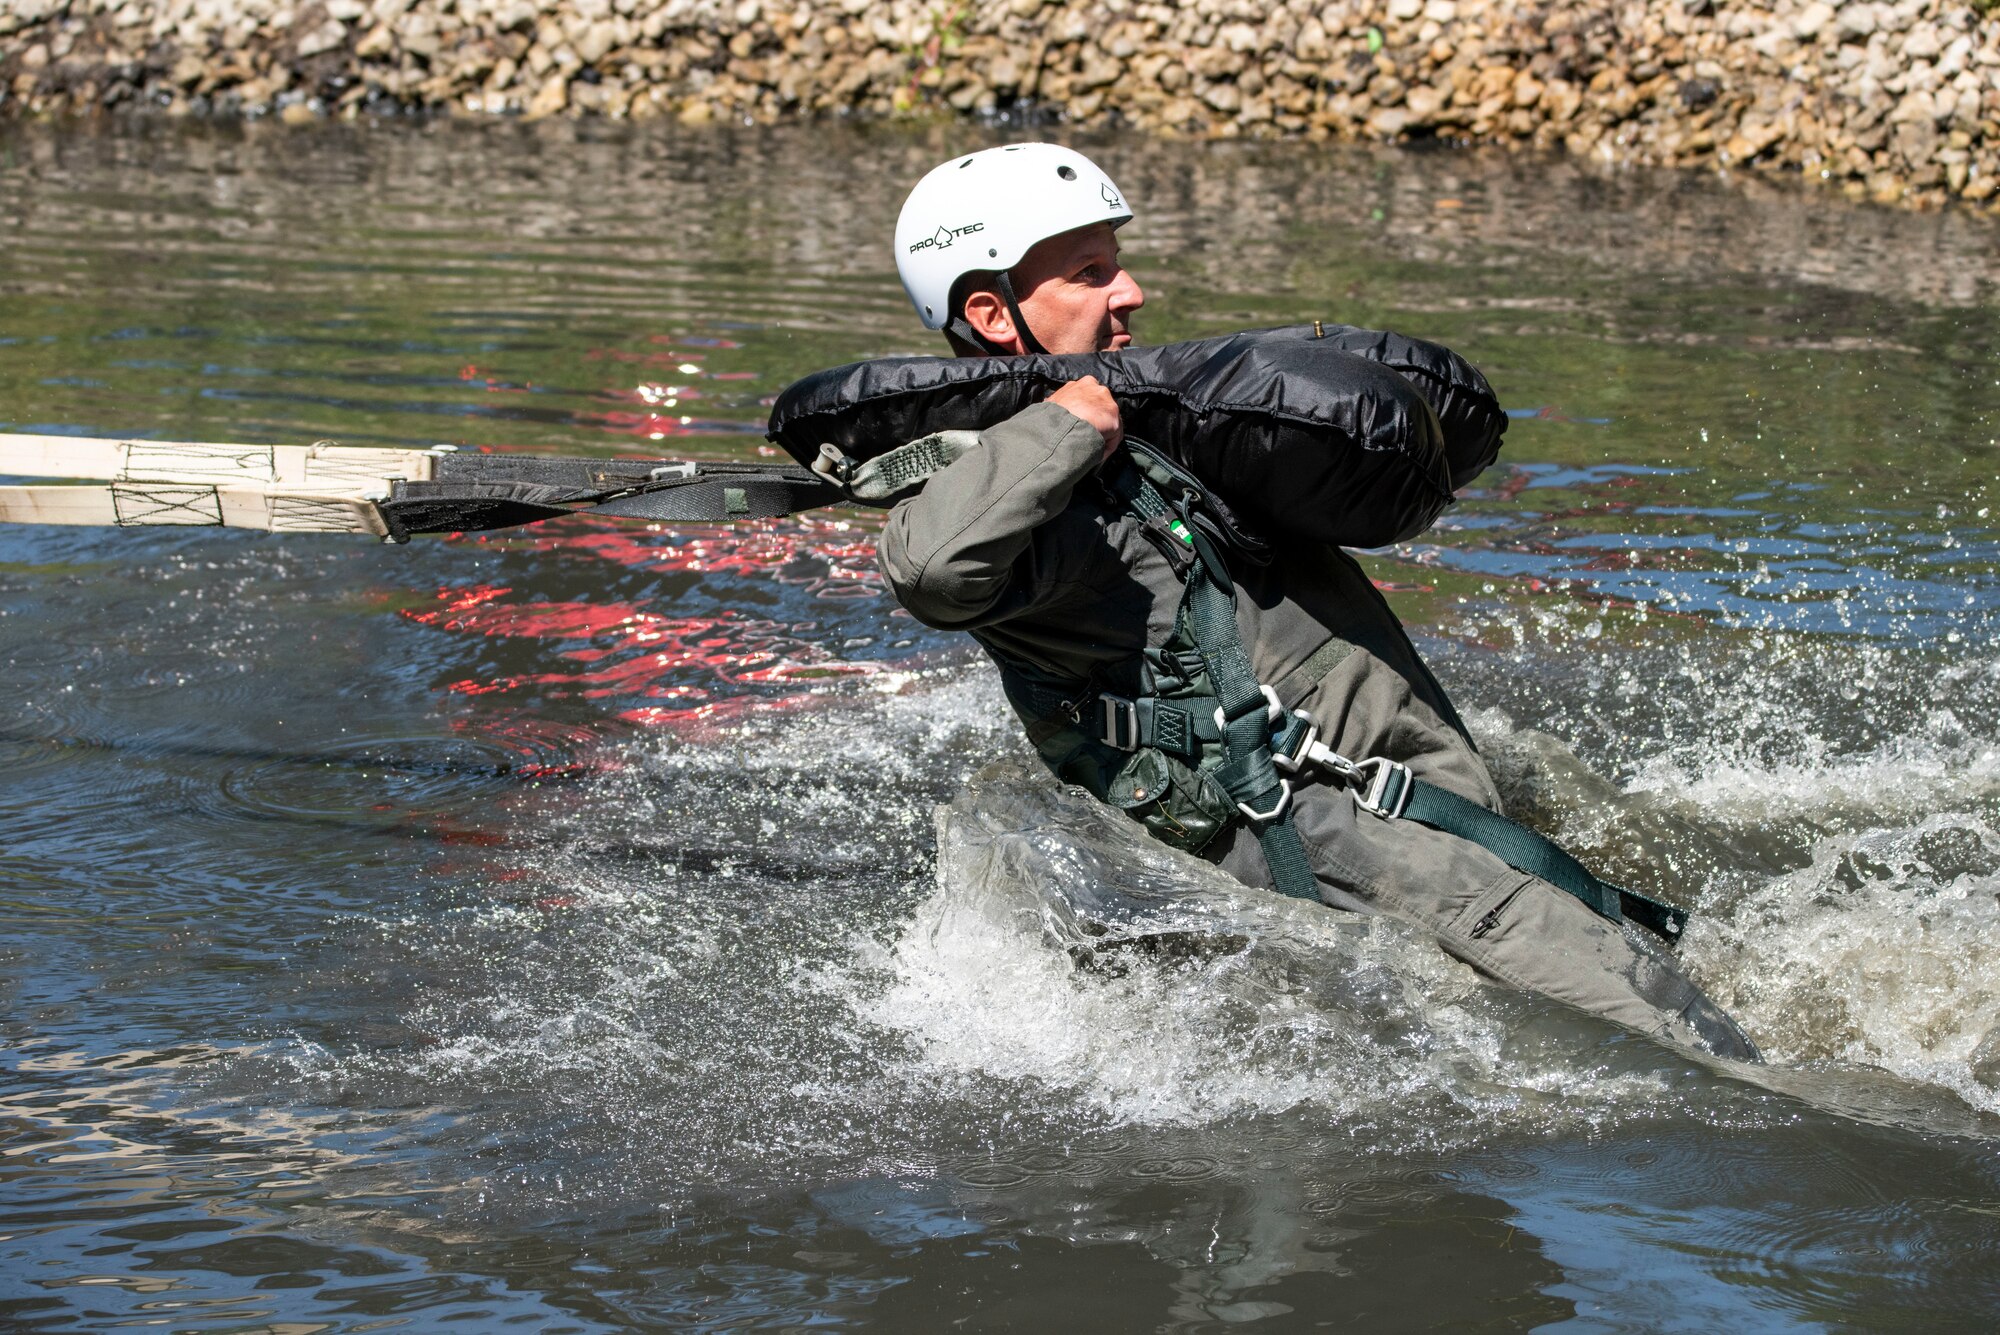 U.S. Air Force Lt. Col. Brian Cherolis, an F-16 fighter pilot assigned to the Ohio National Guard’s 180th Fighter Wing is dragged through the water during water survival training in Waterville, Ohio, Aug. 8, 2020.